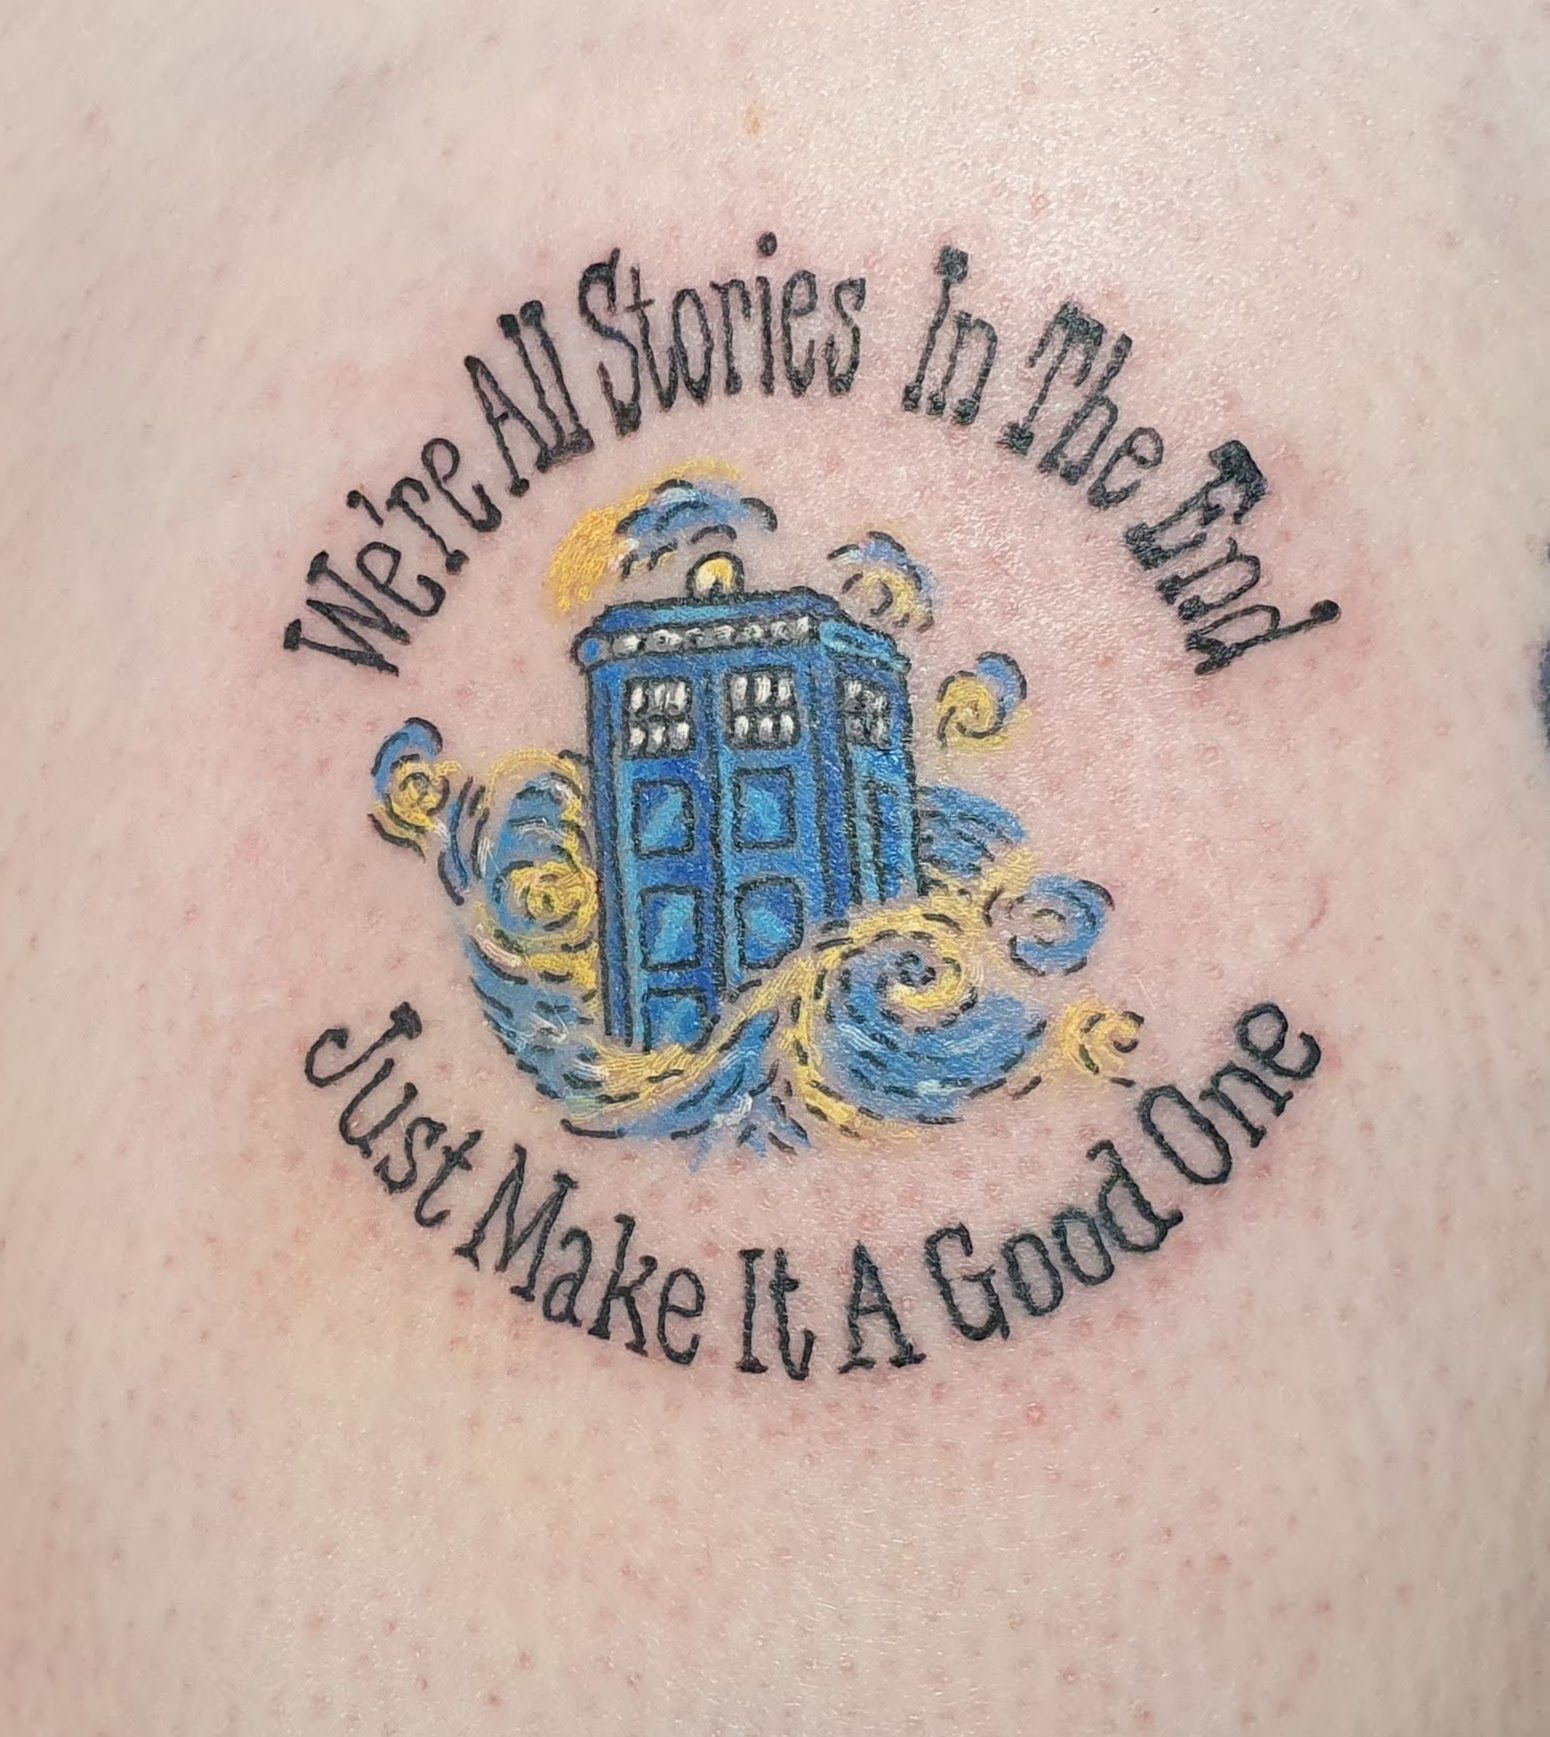 doctor who tattoo